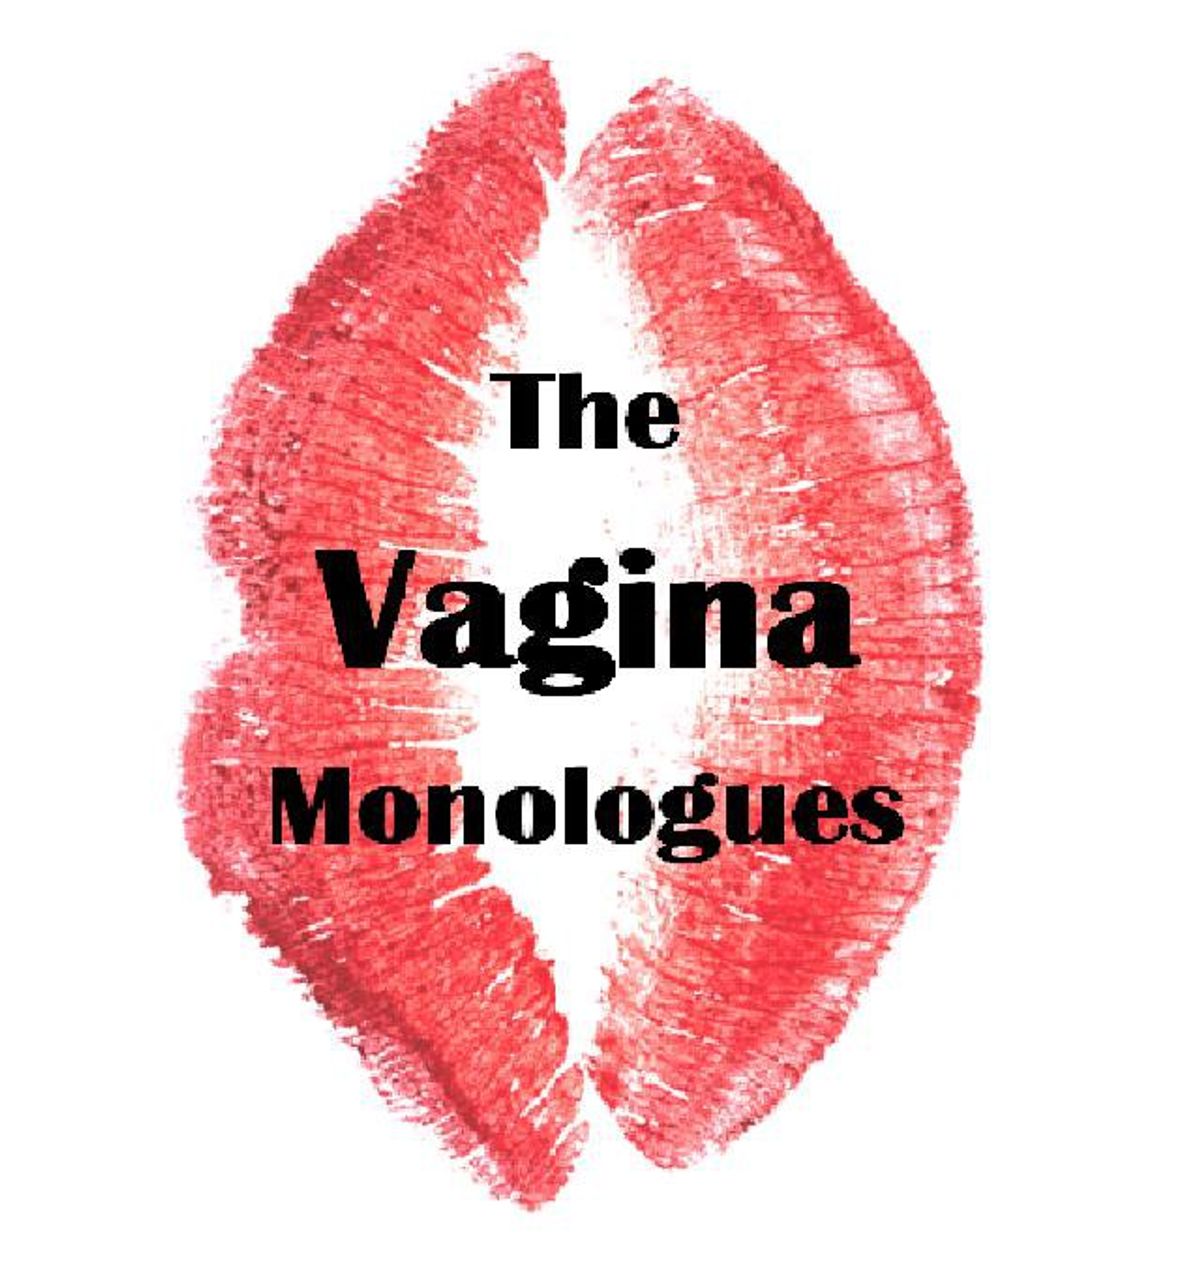 How I Feel About The Vagina Monologues